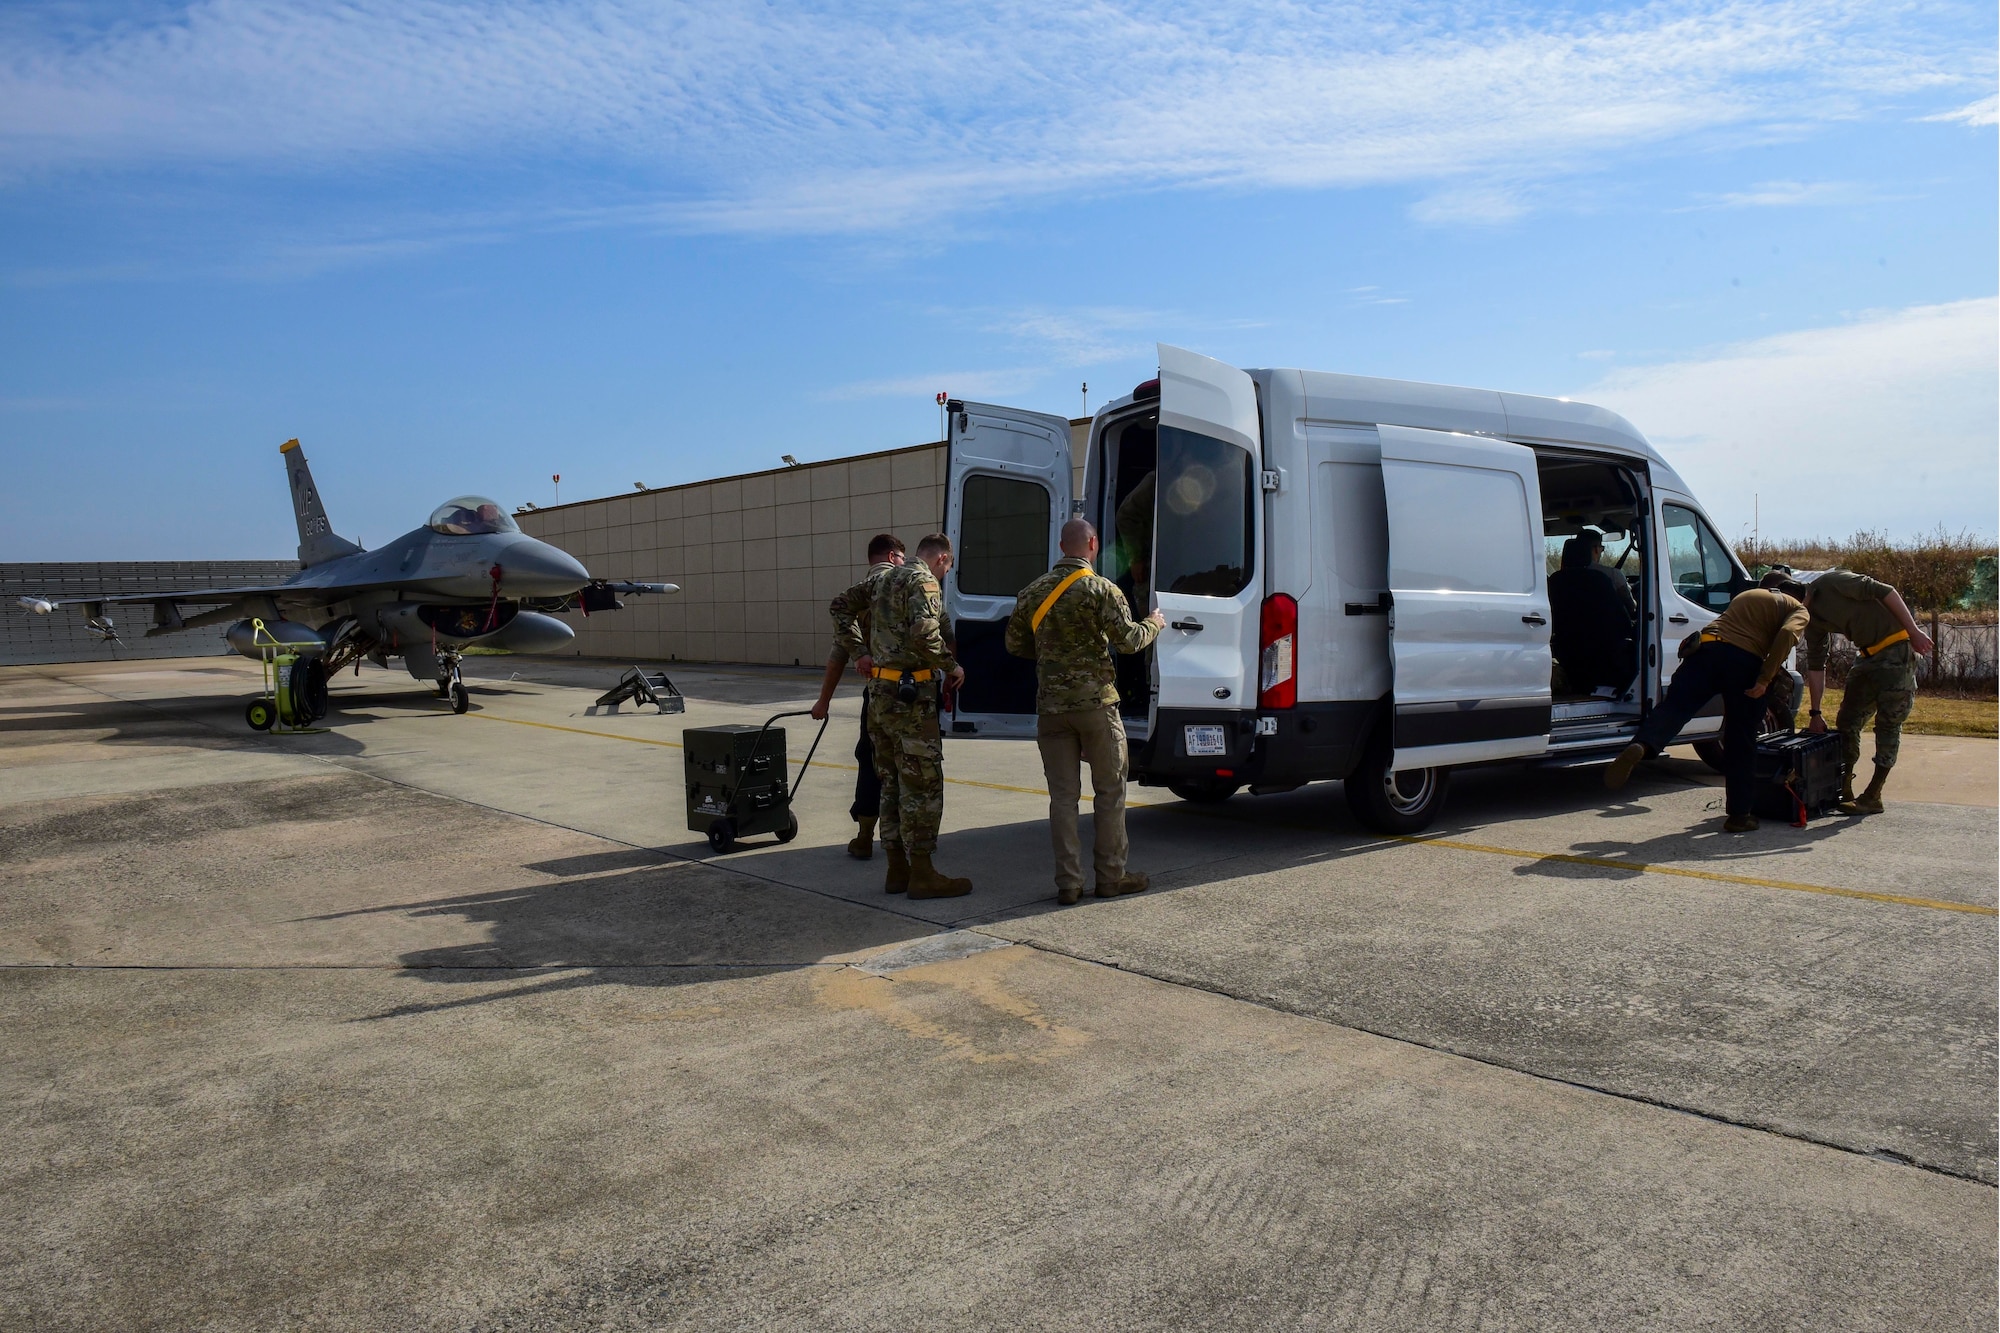 Aircraft maintainers unload equipment.